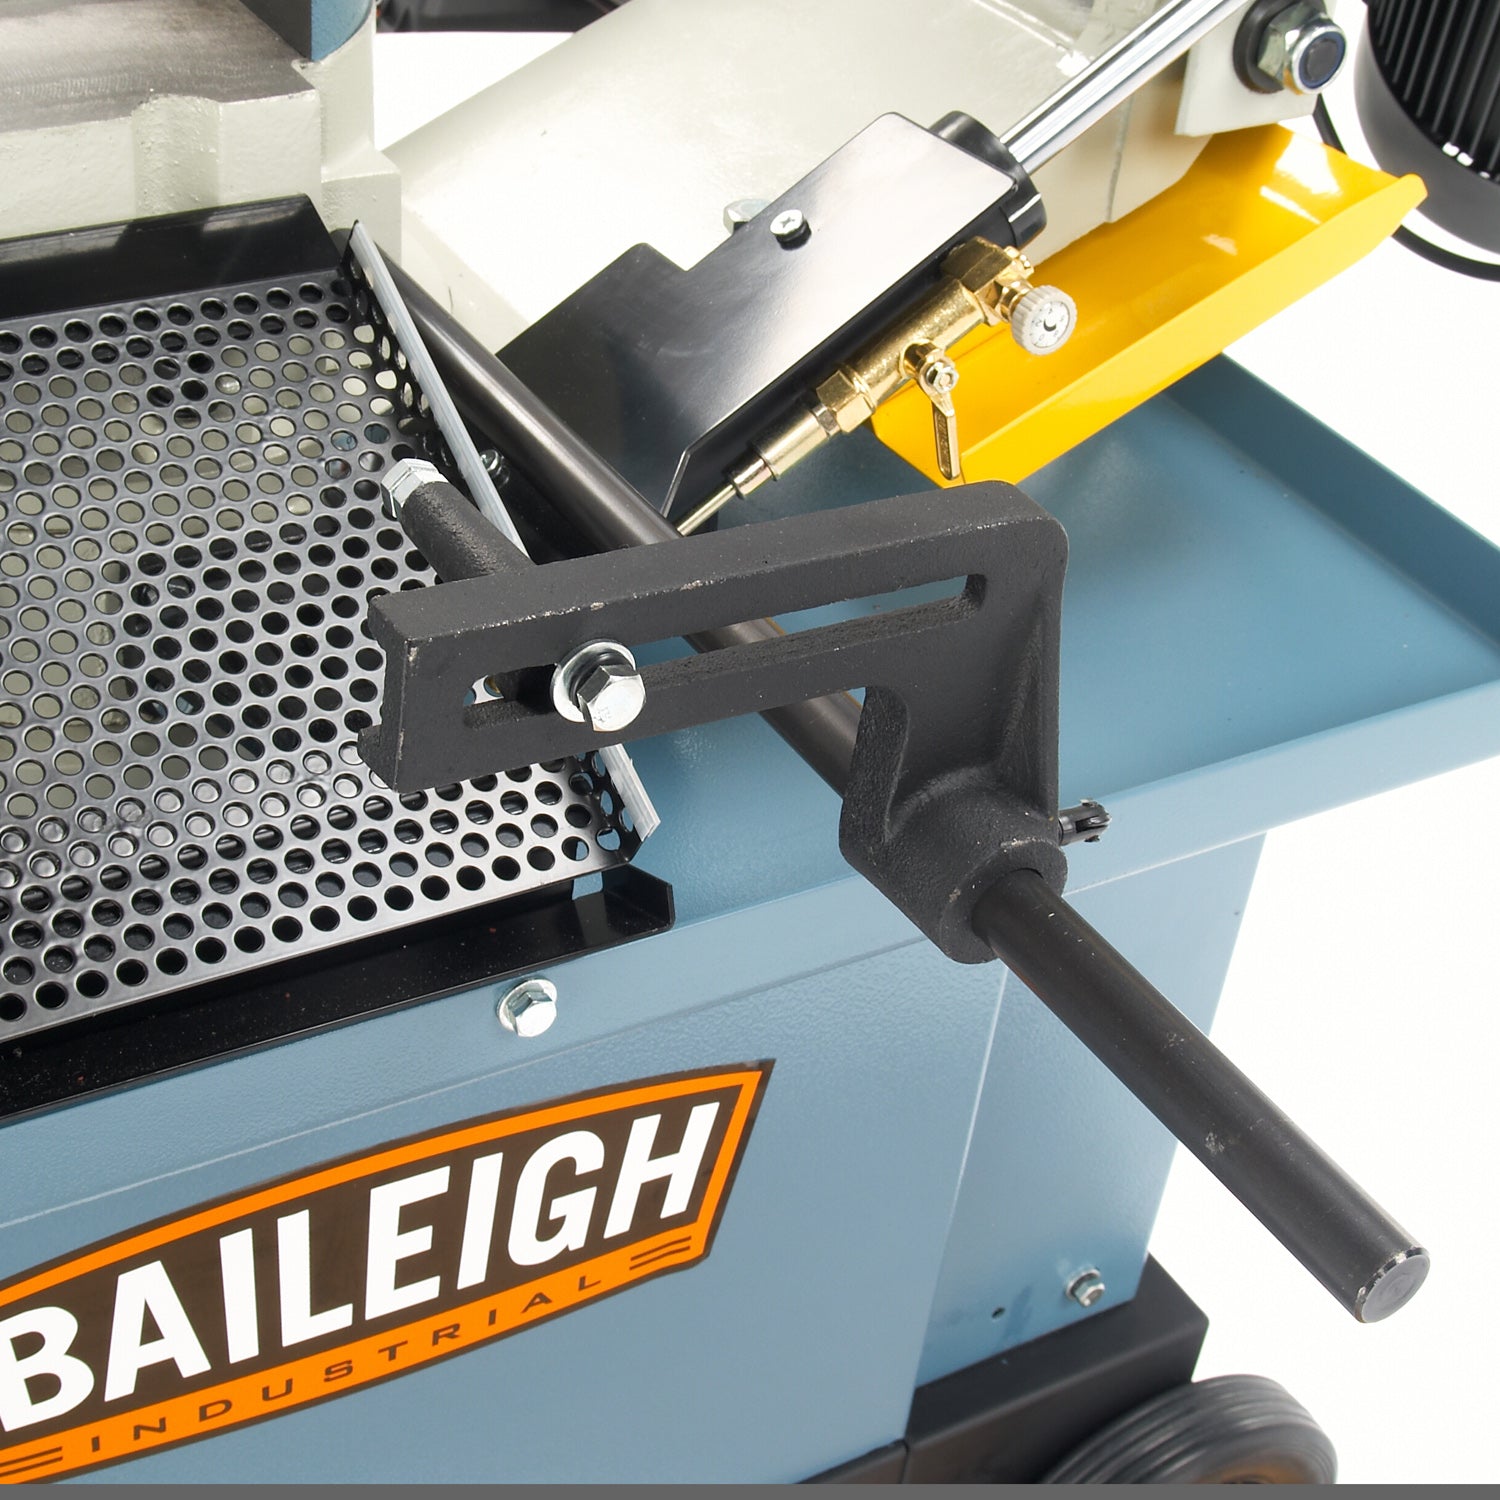 Baileigh BS-712MS 120V Metal Cutting Band Saw with Vertical Cutting Option Mitering Head 3/4" Blade Width